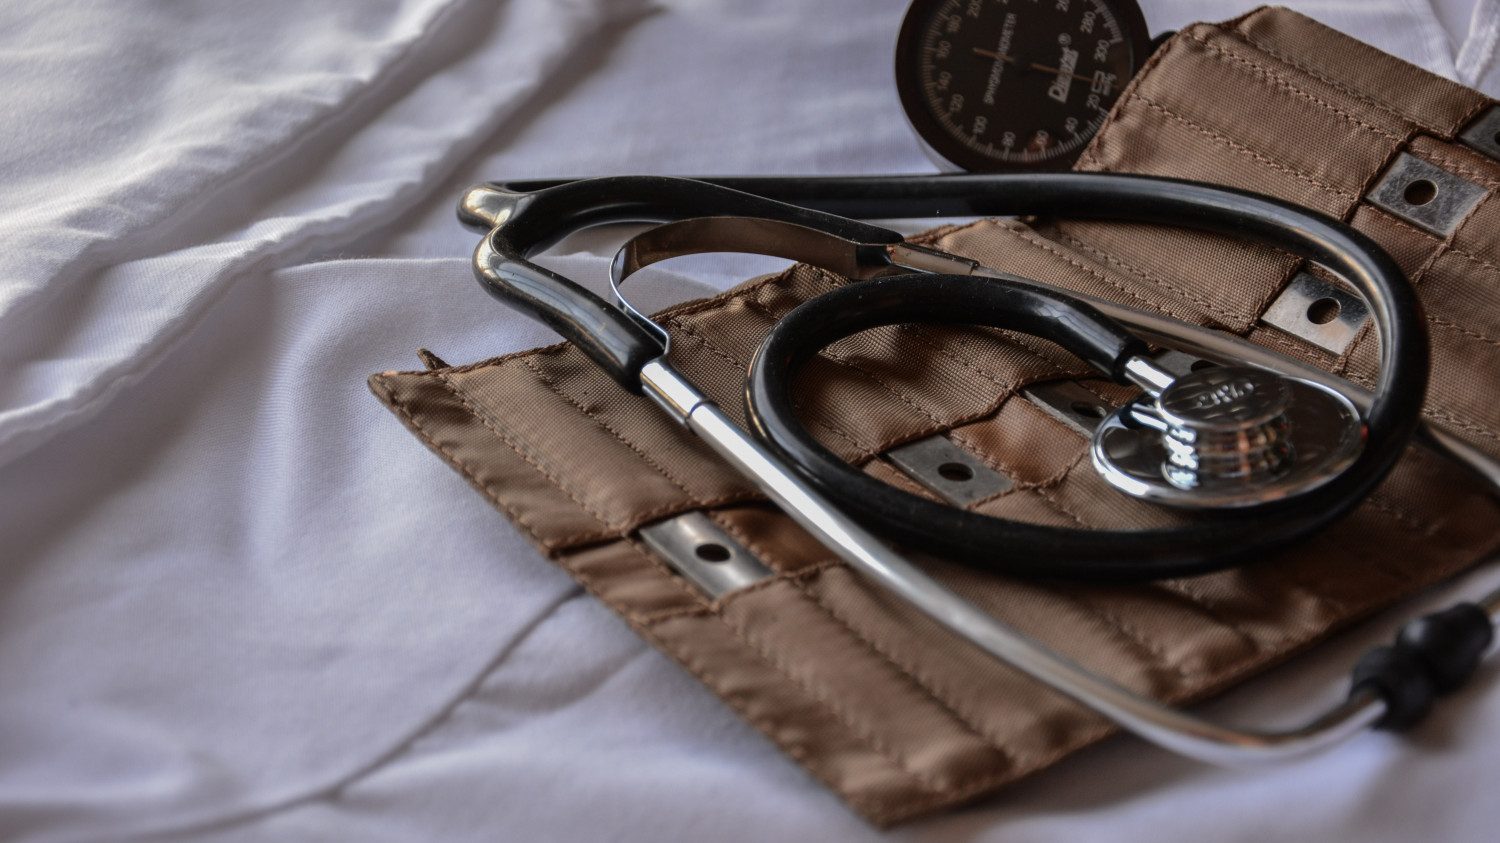 Image of a stethoscope on a hospital bed